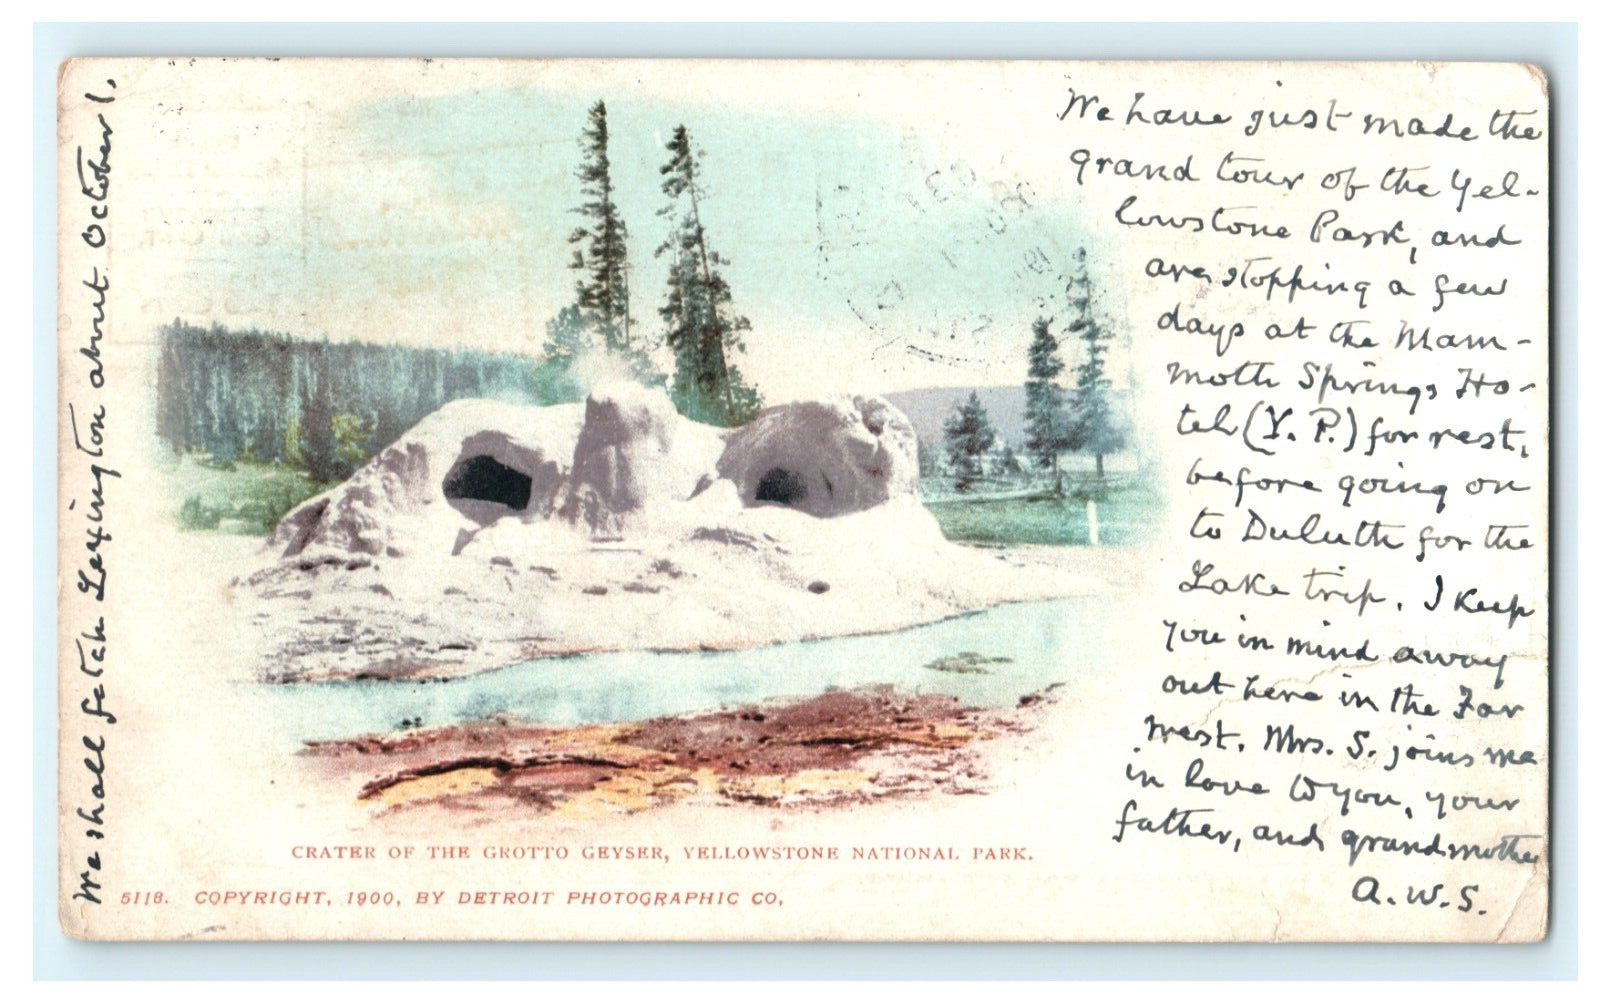 1904 Crater Grotto Geyser Yellowstone National Park WY - Posted - Torn